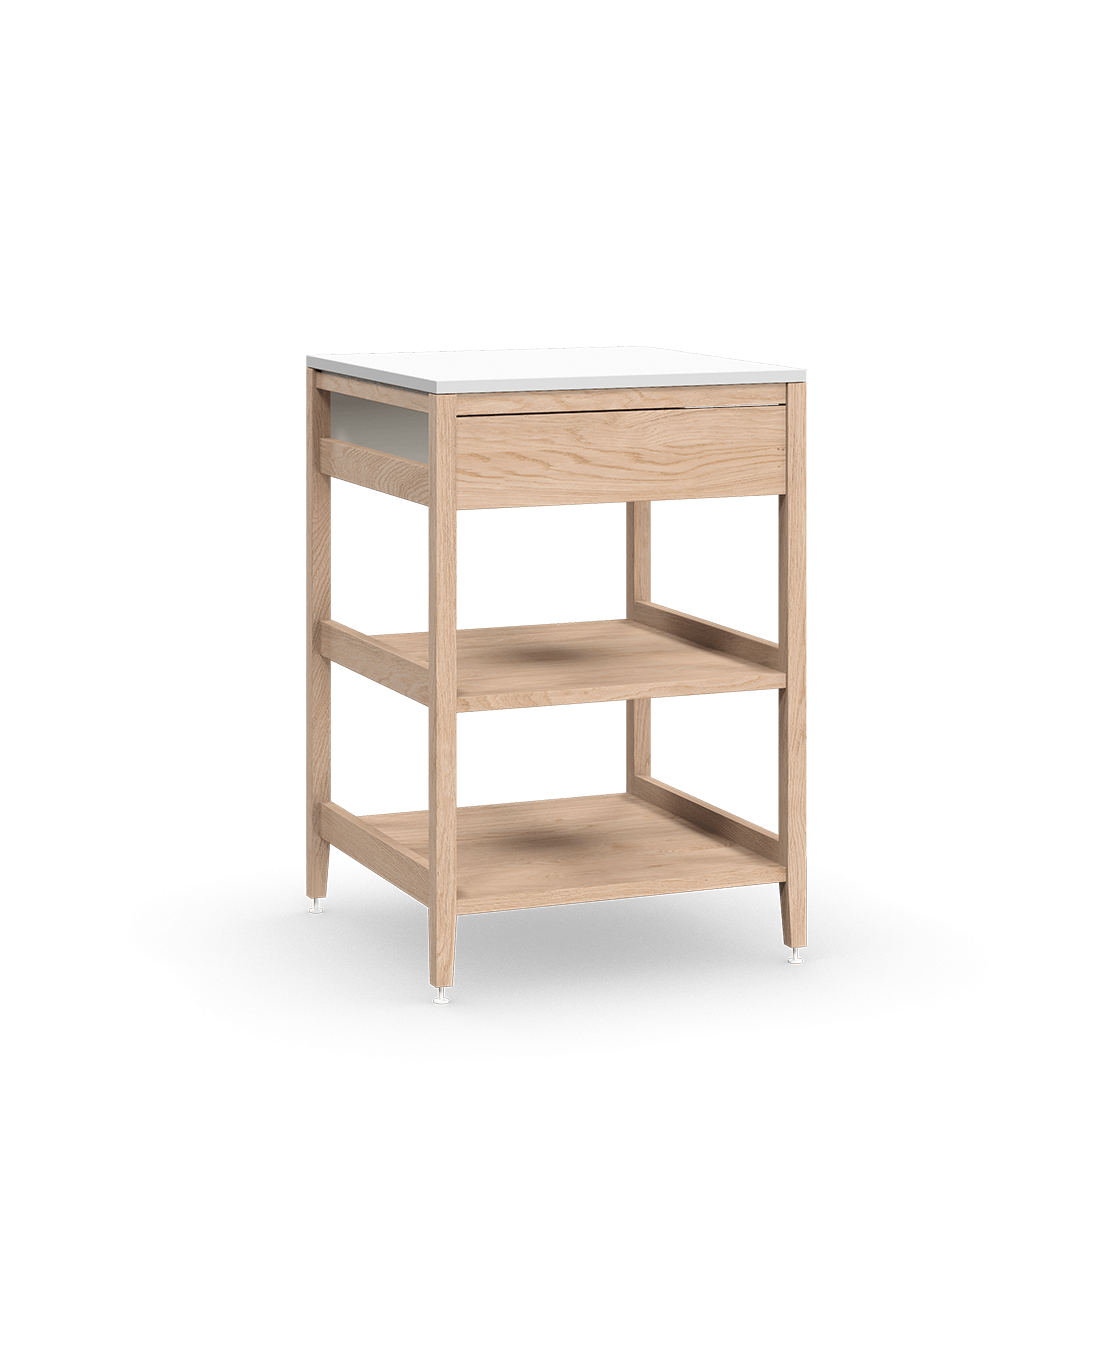 Coquo modular kitchen corner cabinet in natural oak, fix front + two wood shelves. 